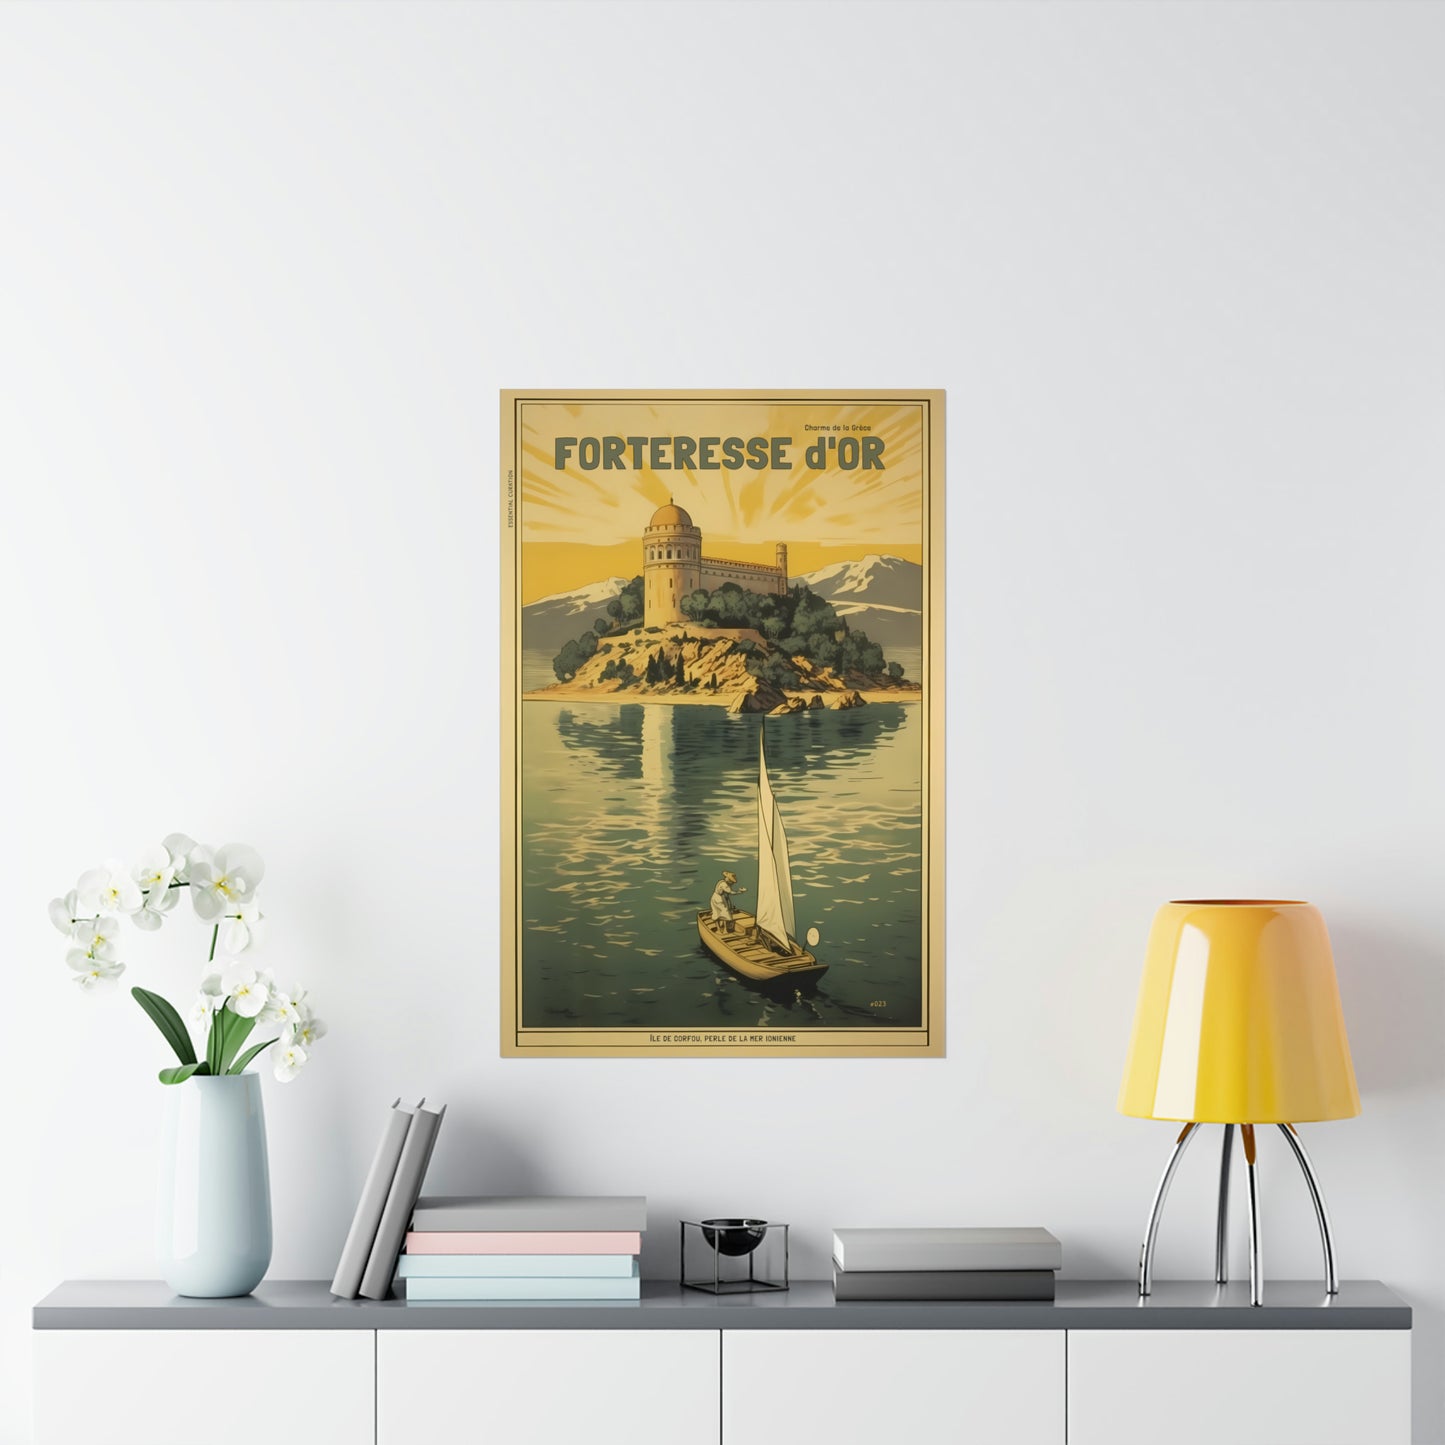 Color Retro Poster Wall Art from Greece by George Tatakis | A boat sailing by the Fortress of Corfu - large size